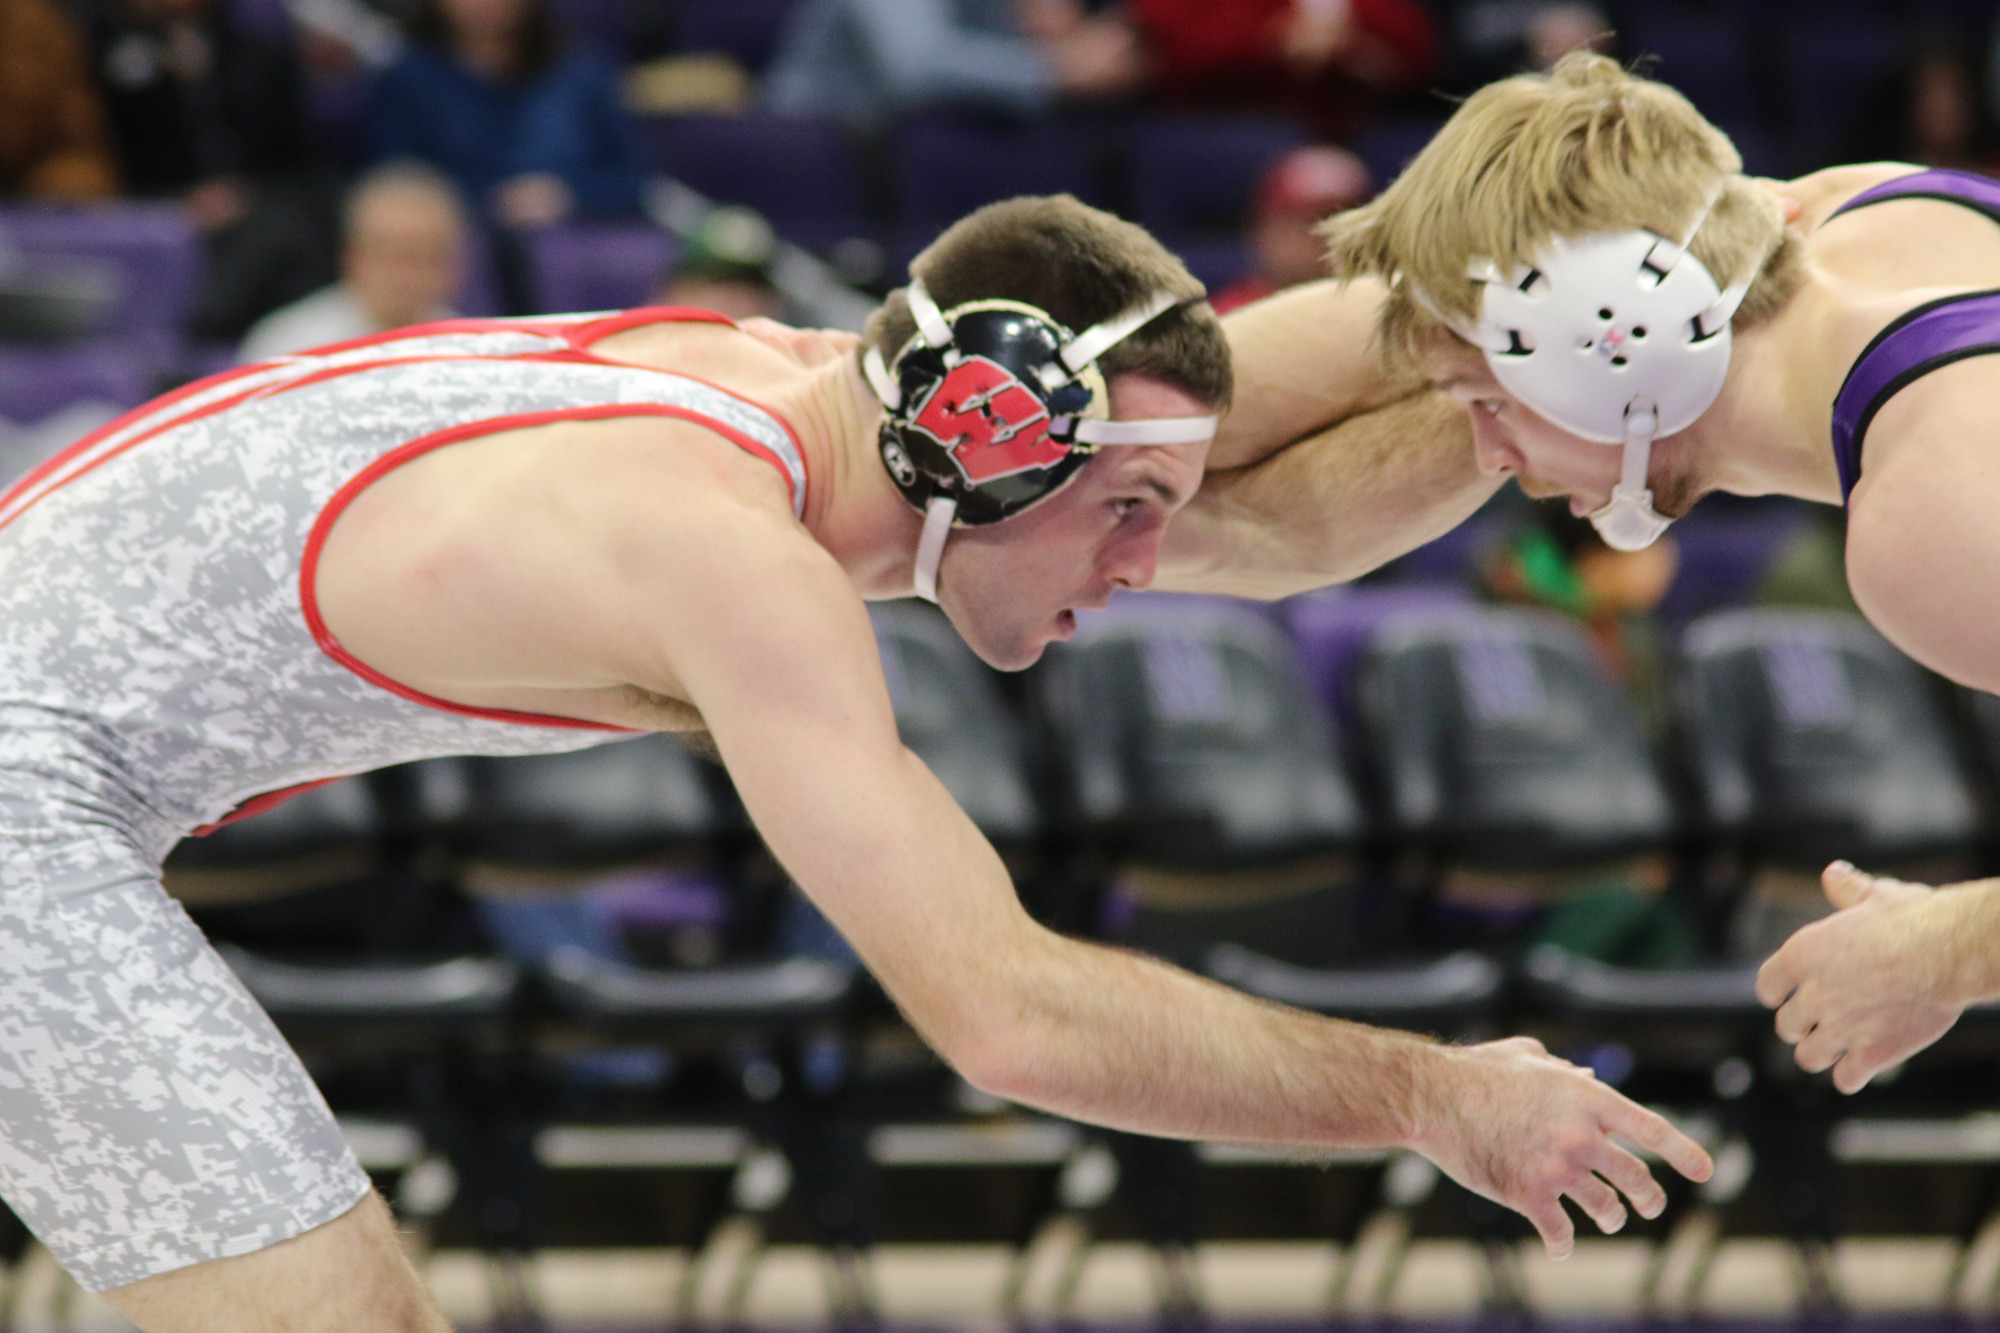 Garrett Model, Wisconsin wrestling, earns an major decision victory against Aiden Vanderbush, Northwestern wrestling, during the Badgers' Big Ten dual match against the Wildcats on Friday, January 27, 2023 in Evanston, Illinois.